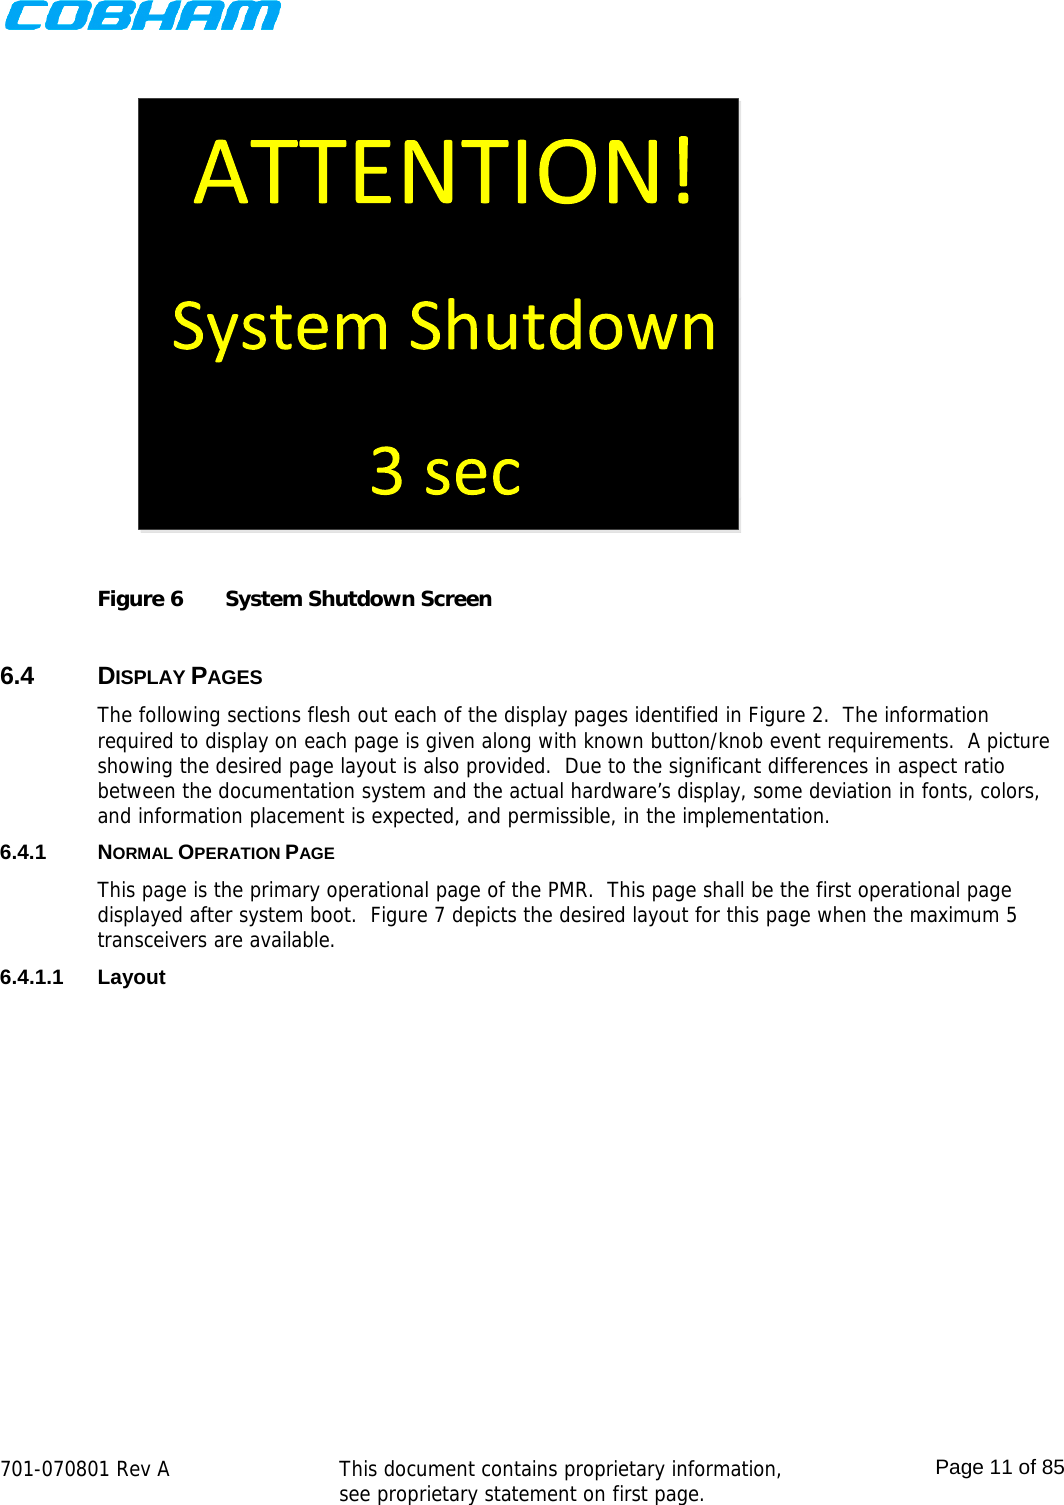    701-070801 Rev A   This document contains proprietary information, see proprietary statement on first page.  Page 11 of 85   Figure 6  System Shutdown Screen  6.4 DISPLAY PAGES The following sections flesh out each of the display pages identified in Figure 2.  The information required to display on each page is given along with known button/knob event requirements.  A picture showing the desired page layout is also provided.  Due to the significant differences in aspect ratio between the documentation system and the actual hardware’s display, some deviation in fonts, colors, and information placement is expected, and permissible, in the implementation. 6.4.1 NORMAL OPERATION PAGE This page is the primary operational page of the PMR.  This page shall be the first operational page displayed after system boot.  Figure 7 depicts the desired layout for this page when the maximum 5 transceivers are available. 6.4.1.1 Layout 